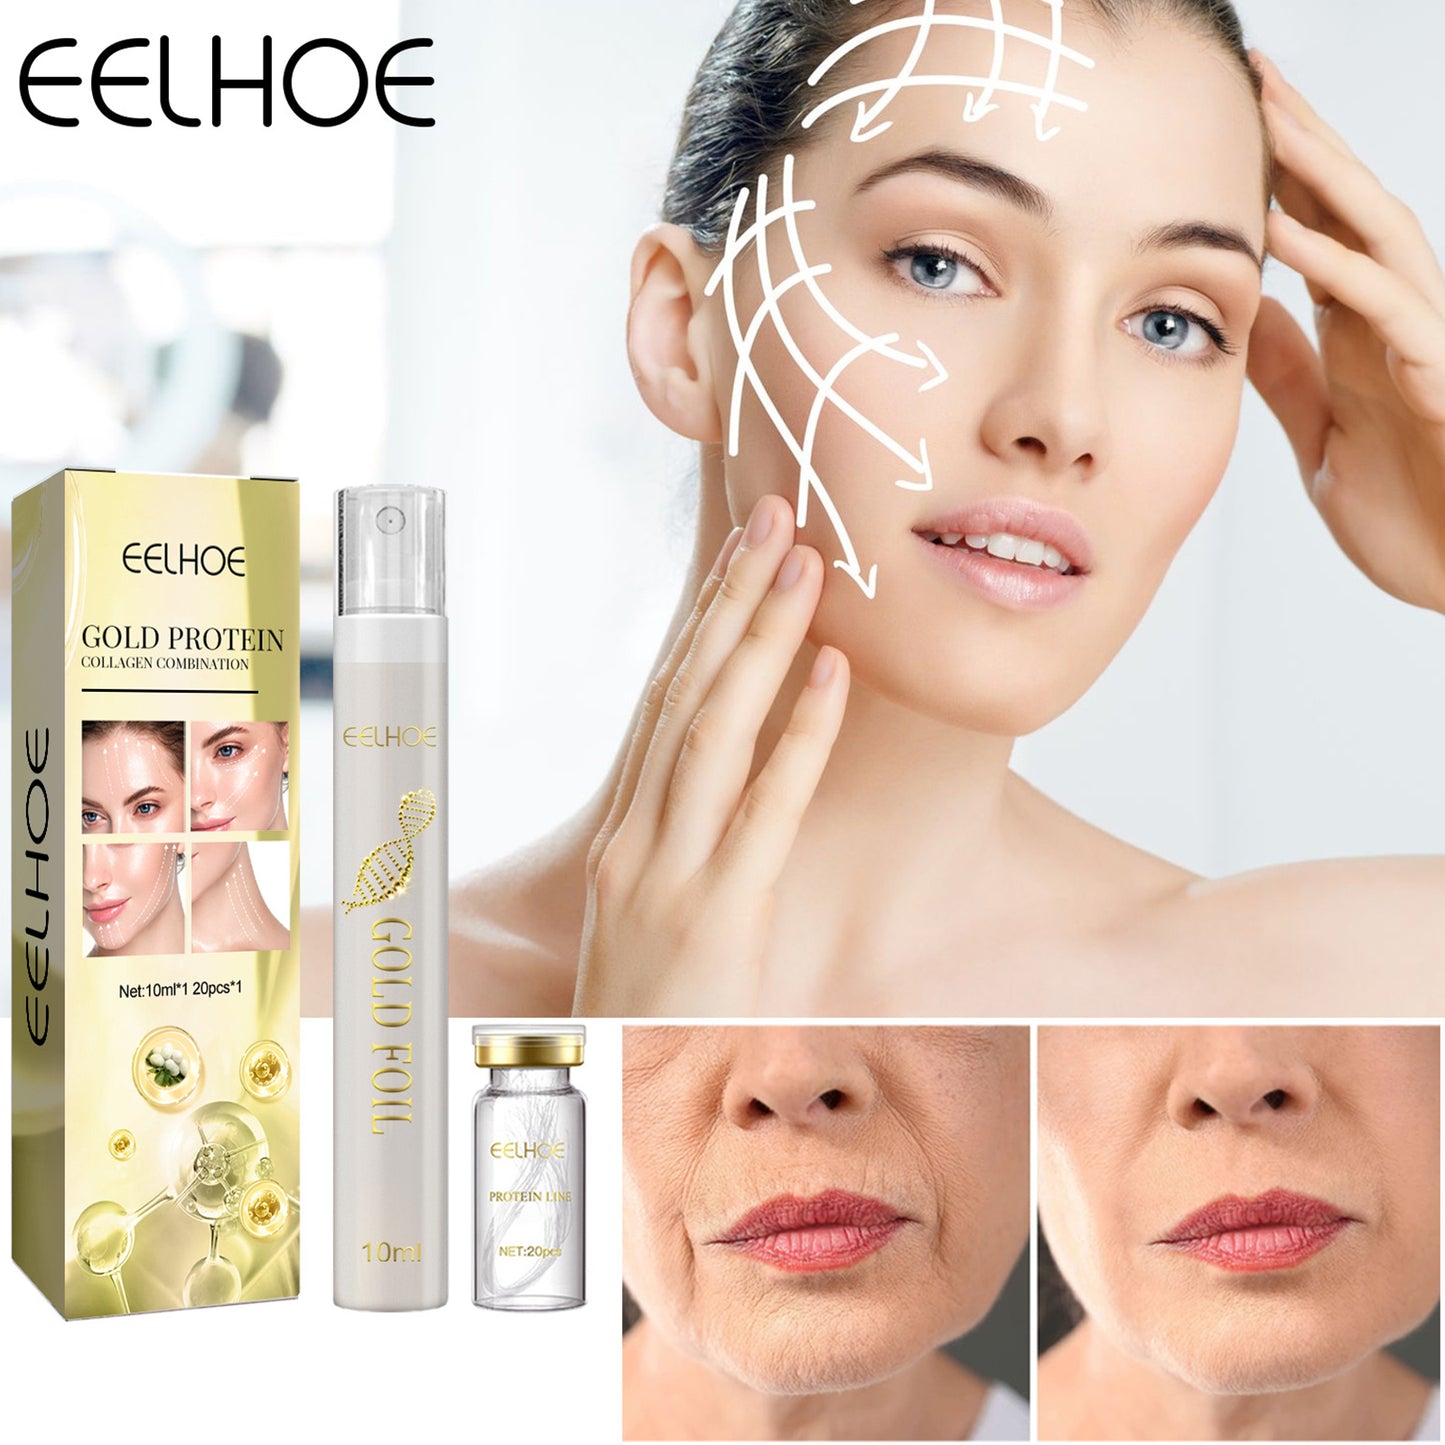 EELHOE Protein Line Fade Fine Lines & Wrinkles Facial Sculpting Lifting Firming (1 Box)